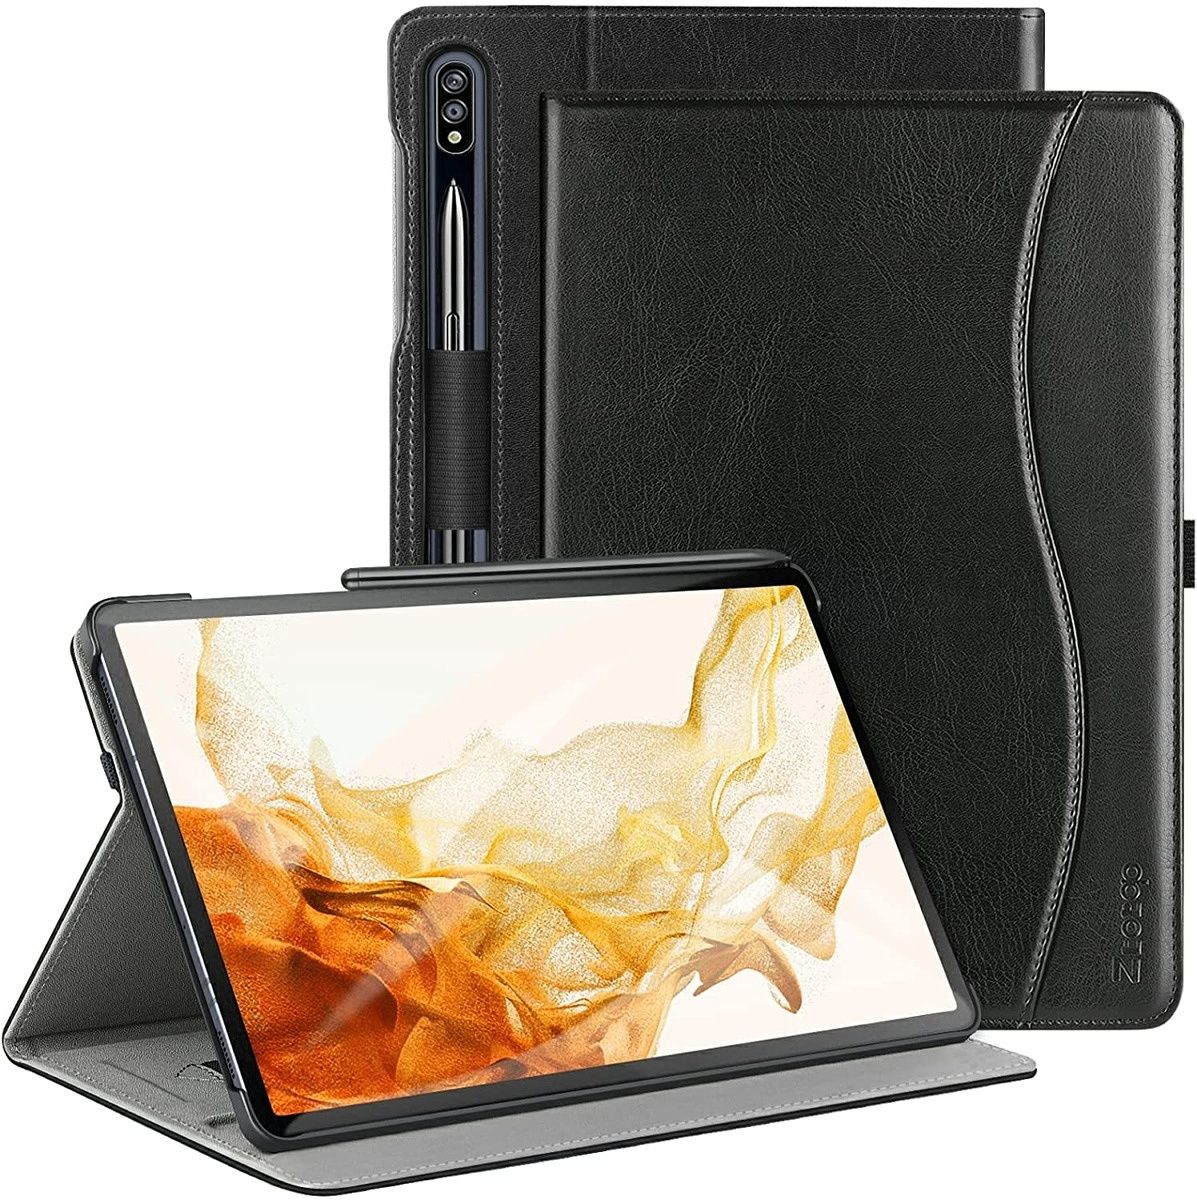 This formal case is made out of leather with three color options to choose from. It has an S Pen holder, supports display auto wake/sleep, and has multiple viewing angles.